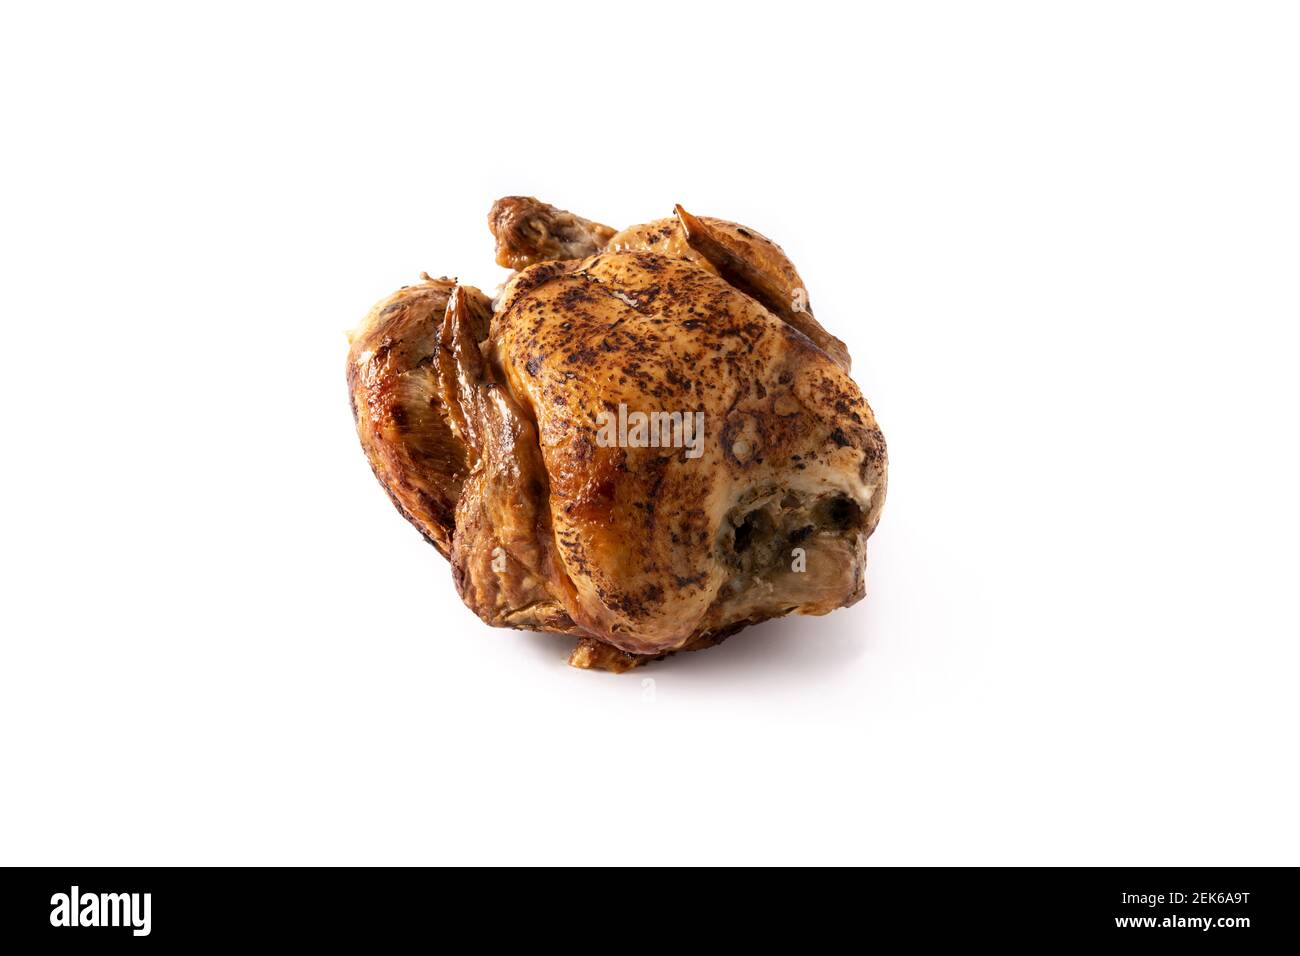 Homemade roasted chicken isolated on white background Stock Photo